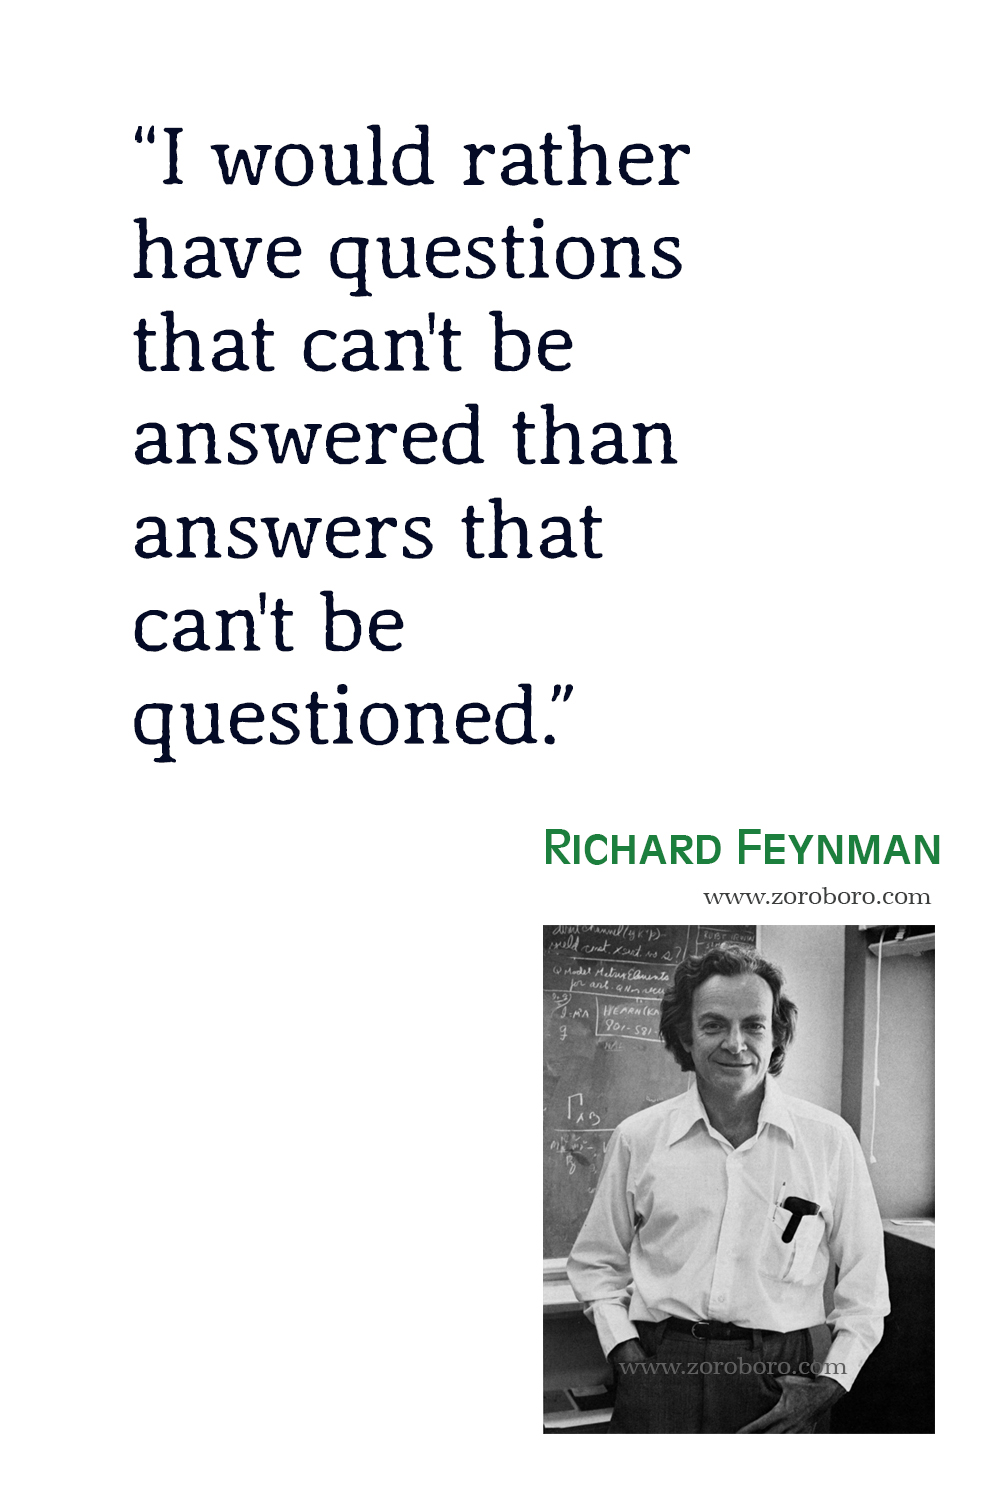 Richard Feynman Quotes, Richard Feynman, Doubt, Skepticism, Inspirational, Life, Science Quotes, The Feynman Lectures on Physics, Richard Feynman Books Quotes